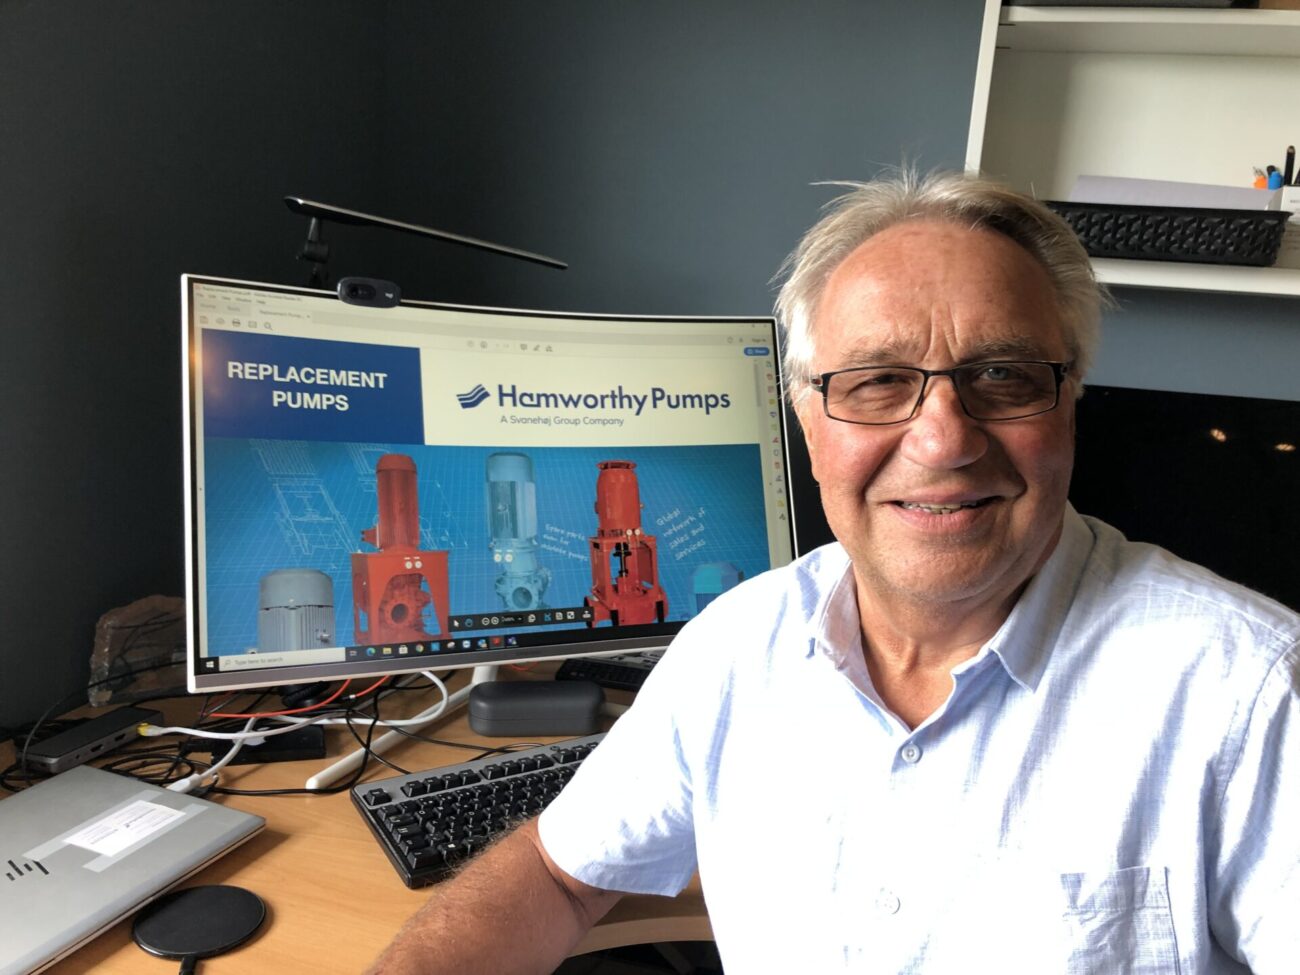 Tom is Hamworthy Pumps’ anchor-man in the Nordic and Baltic countries